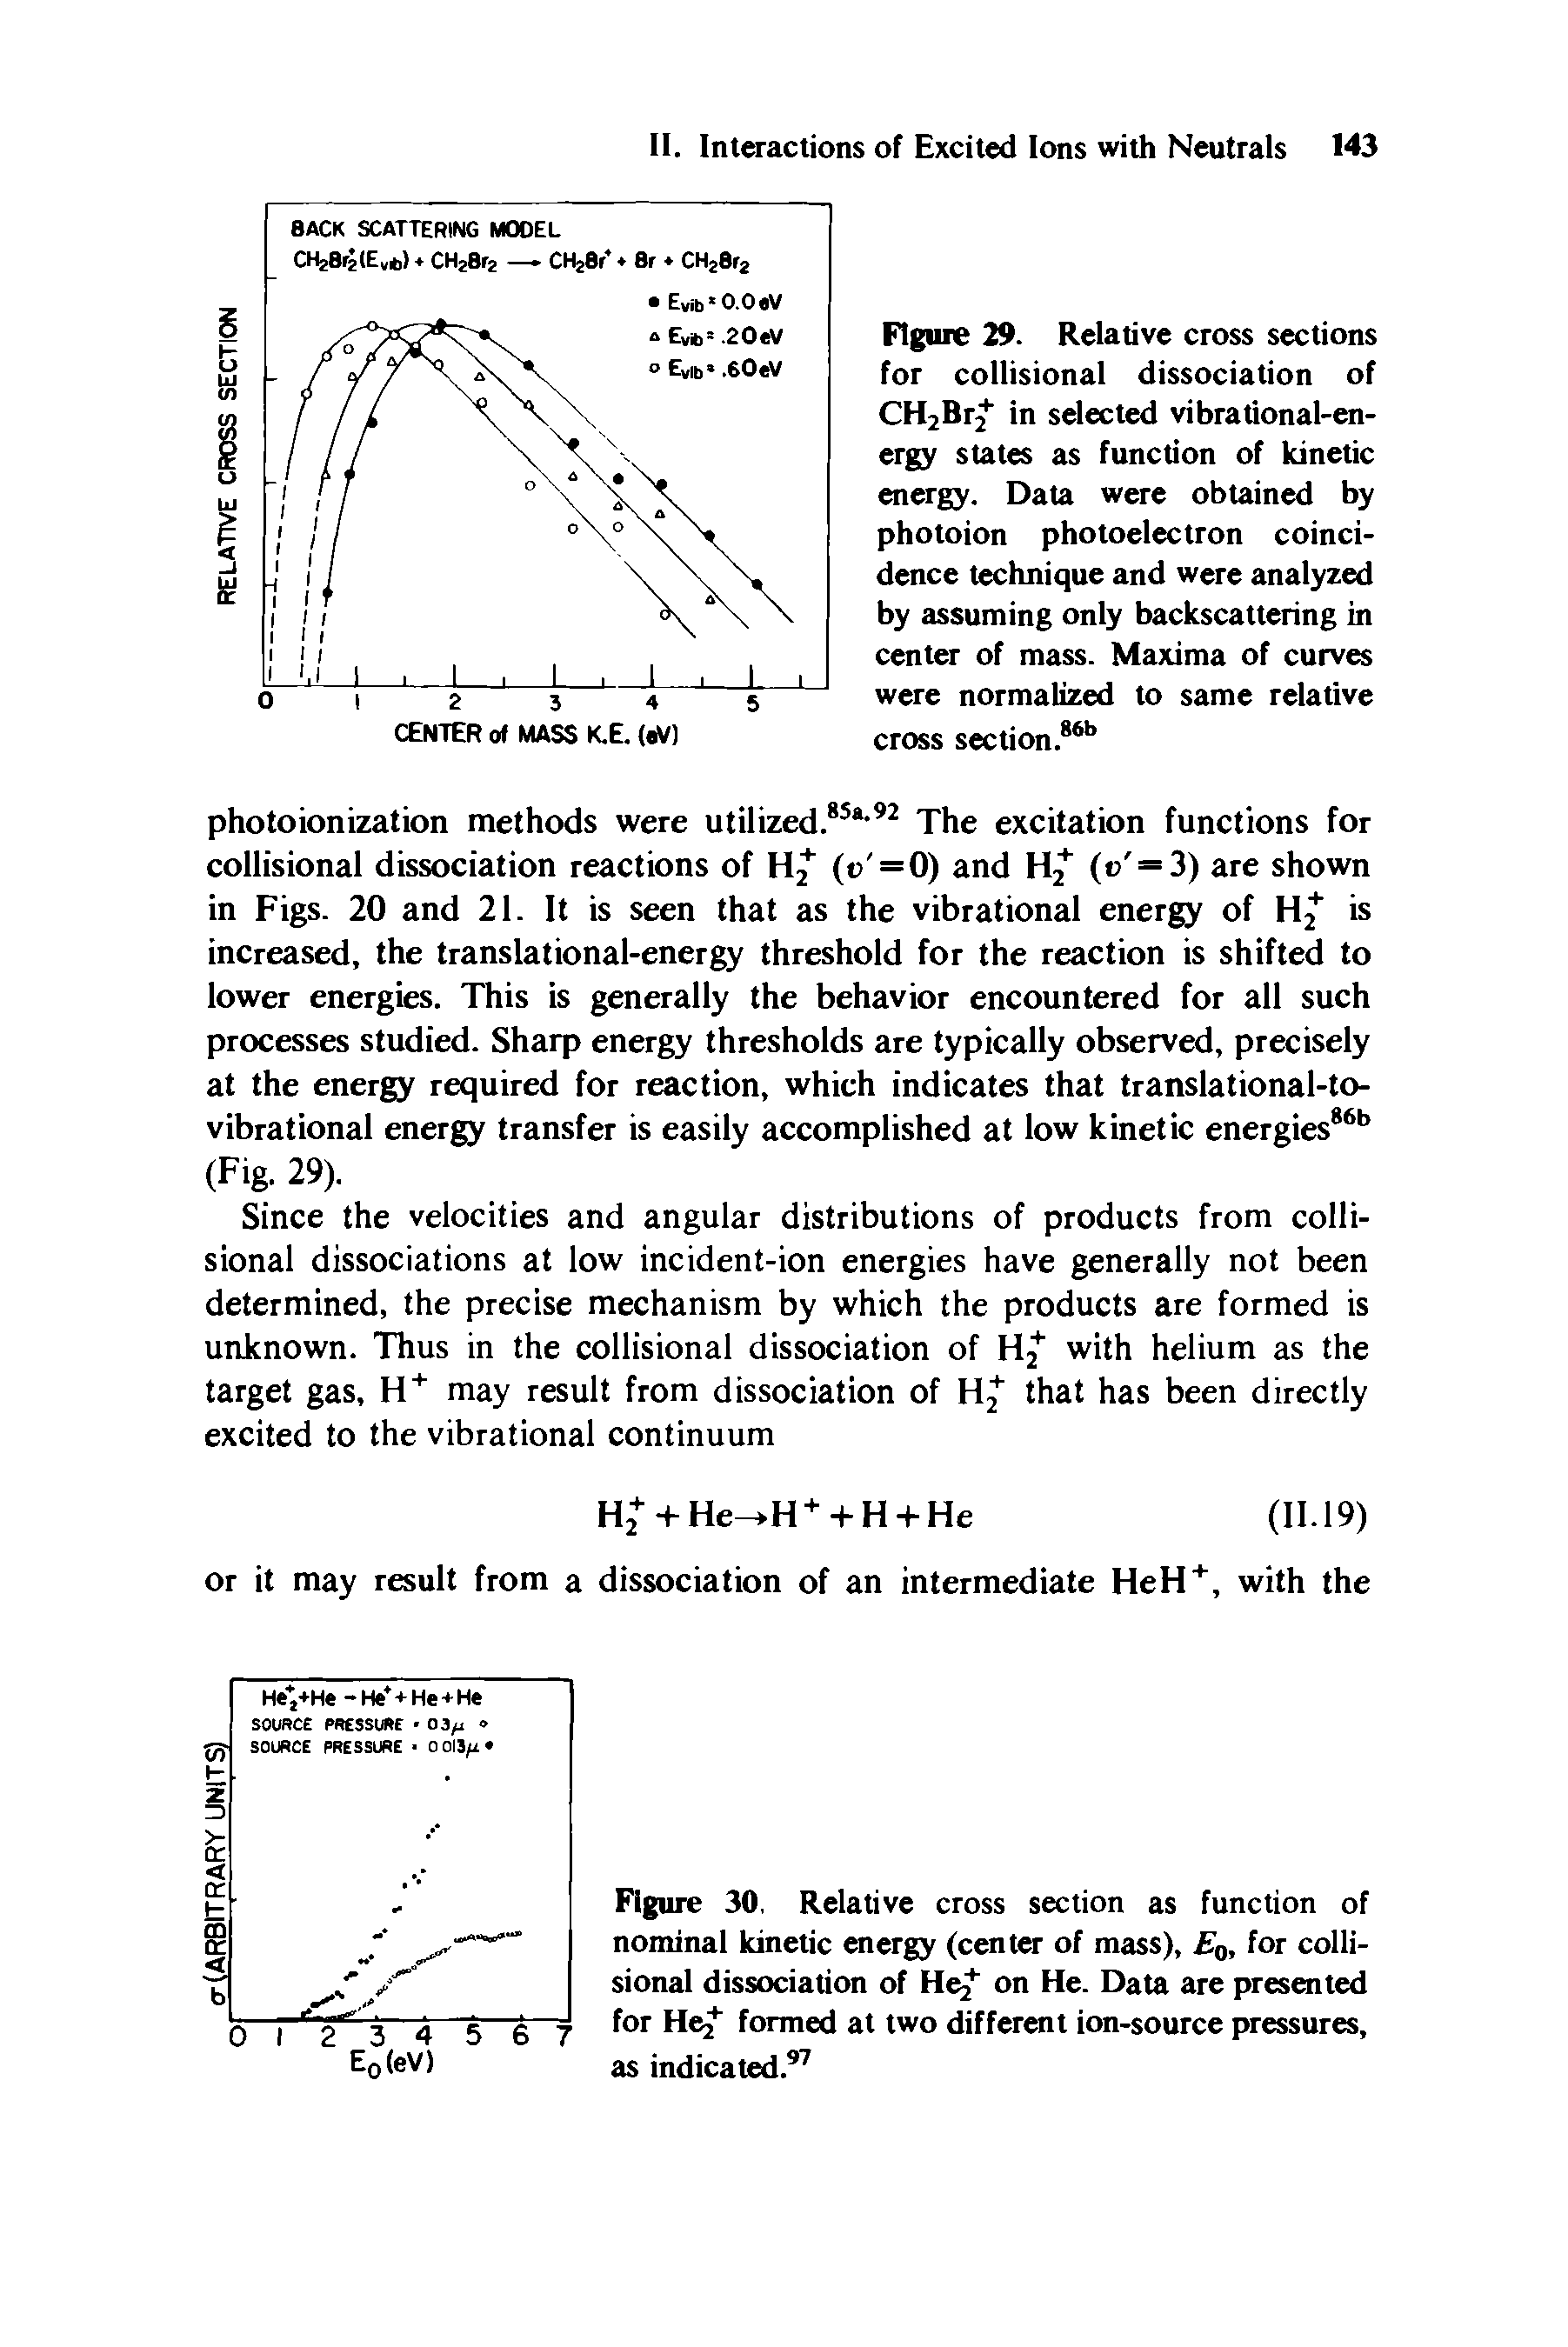 Figure 29. Relative cross sections for collisional dissociation of CHjBr in selected vibrational-energy states as function of kinetic energy. Data were obtained by photoion photoelectron coincidence technique and were analyzed by assuming only backscattering in center of mass. Maxima of curves were normalized to same relative cross section.86b...